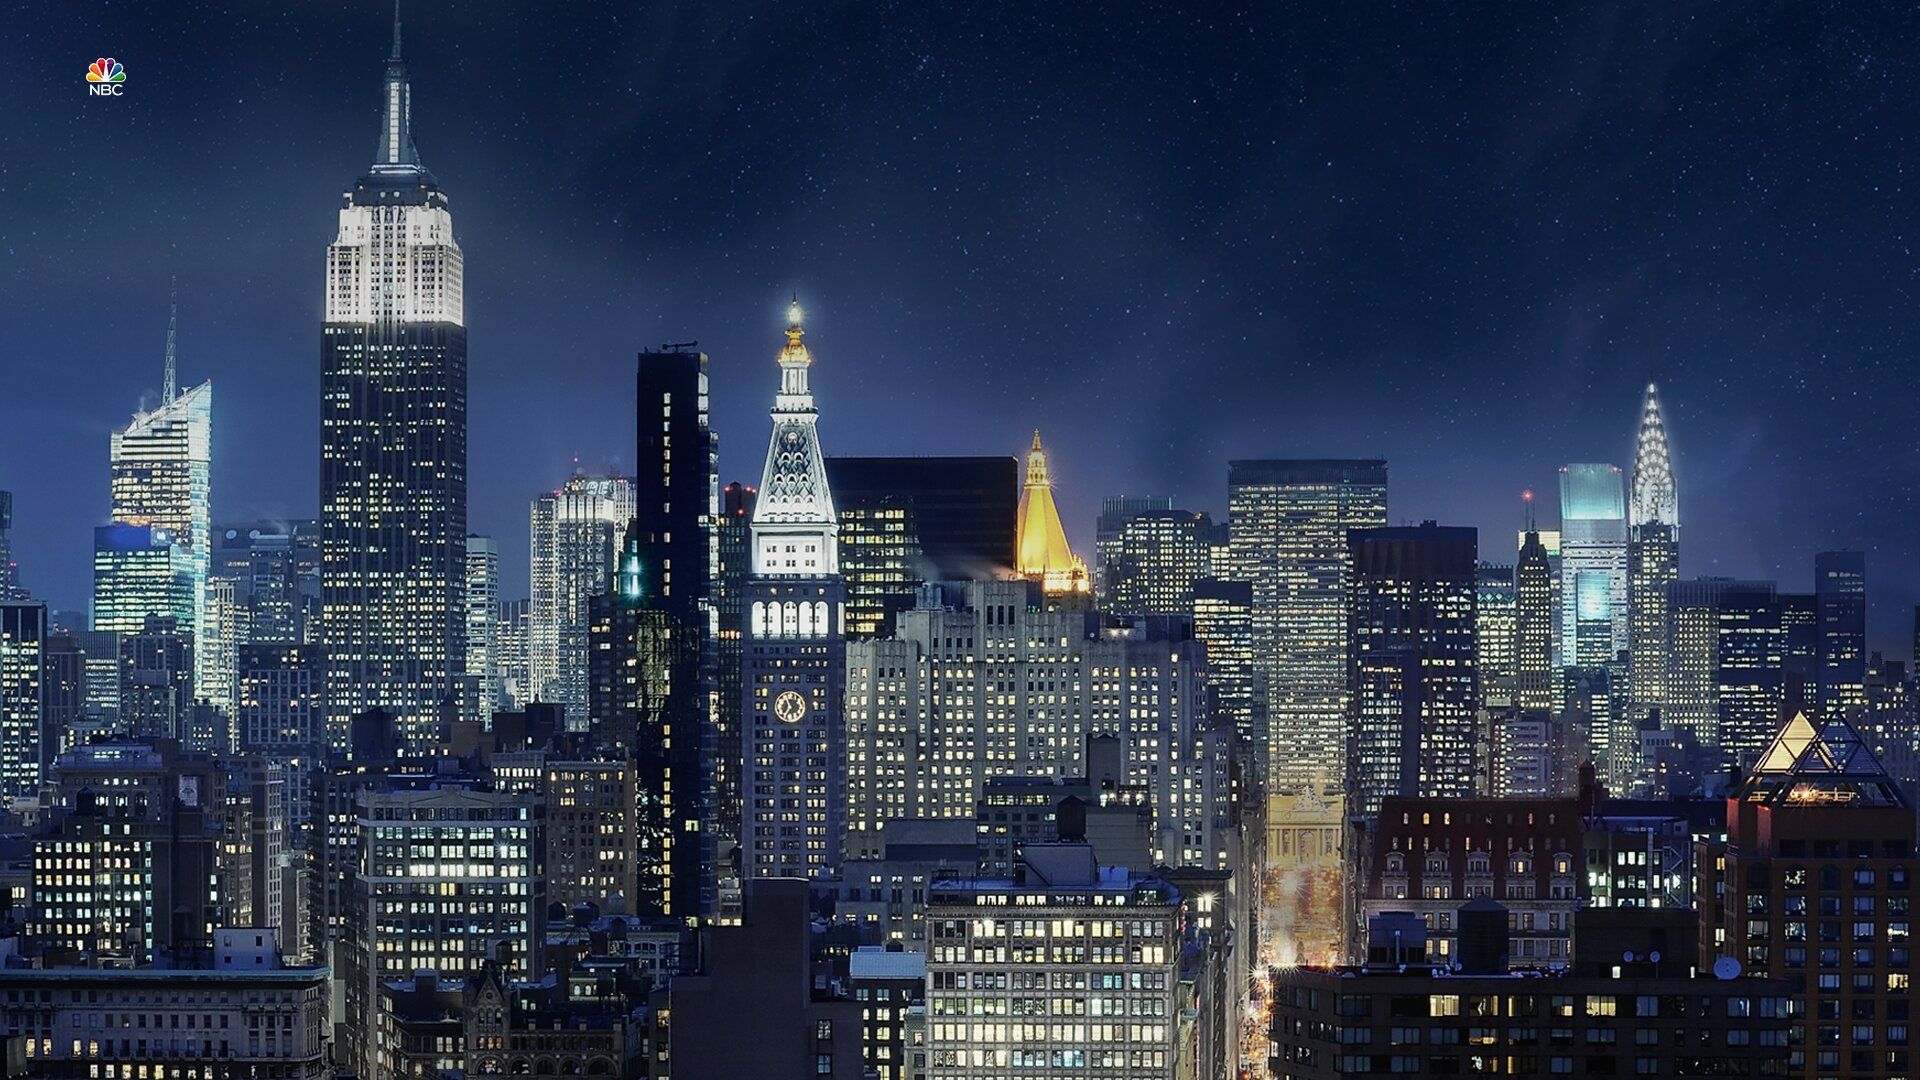 Background Image For The Tonight Show Starring Jimmy Fallon On